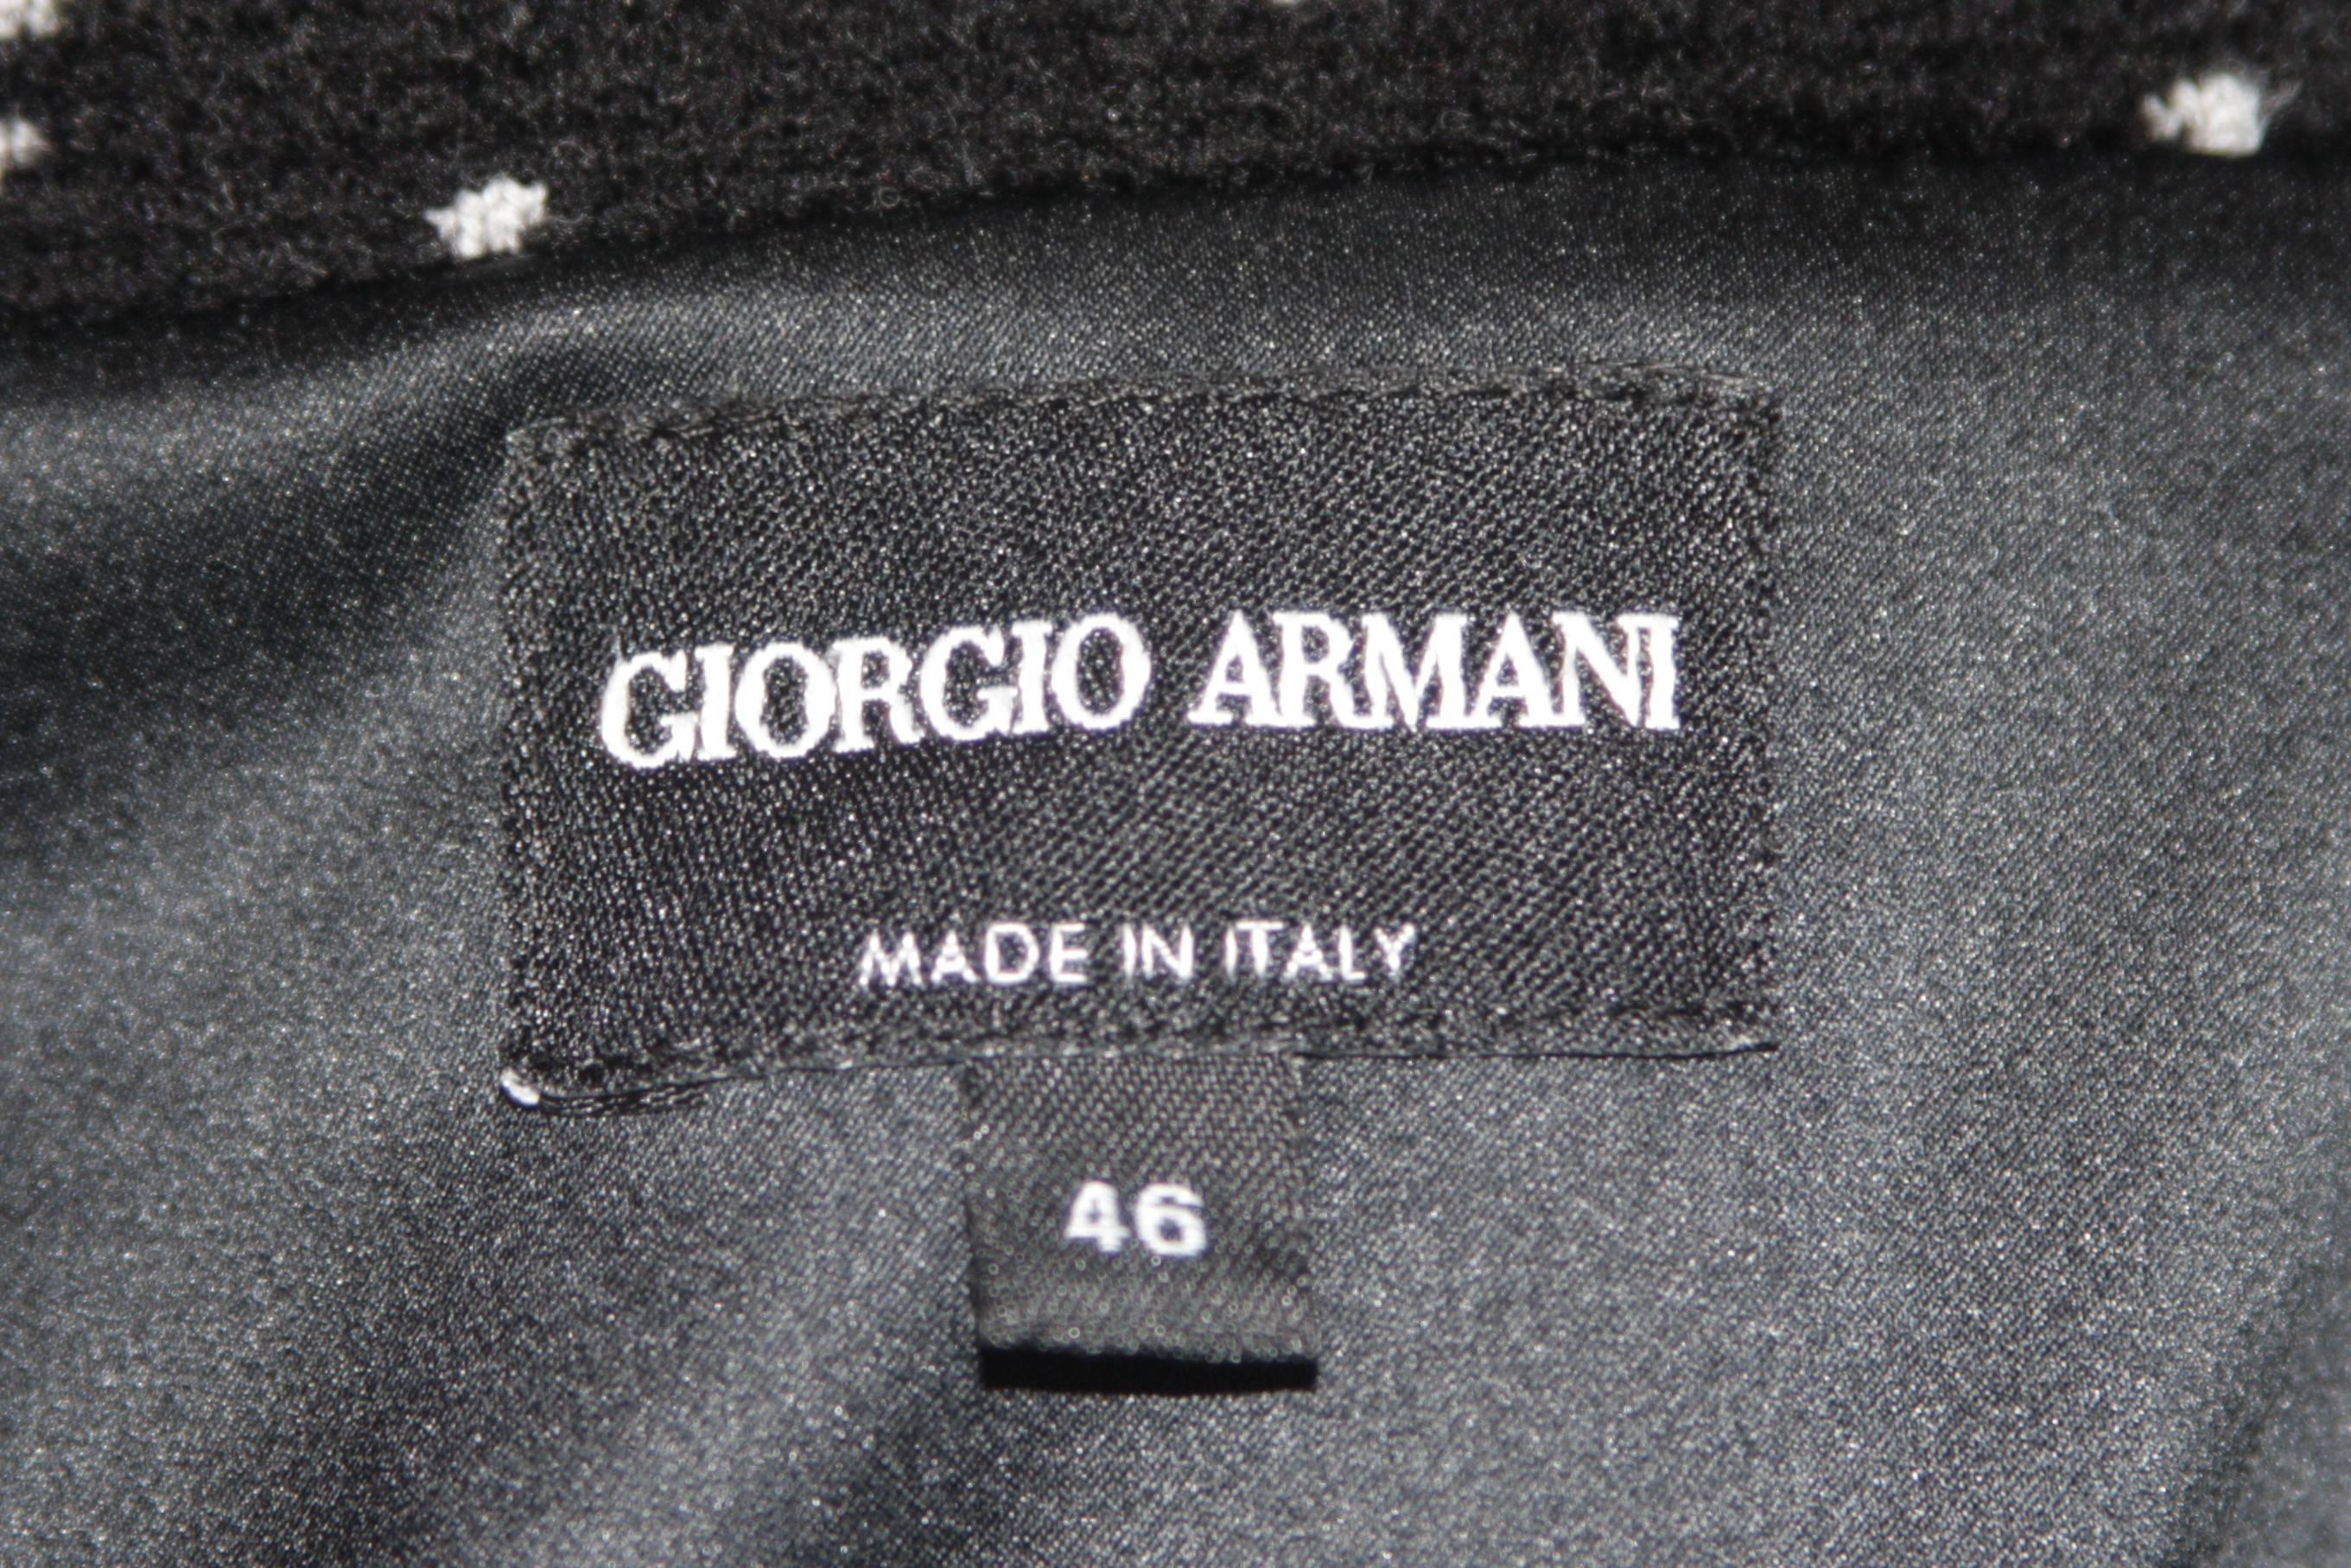 Giorgio Armani Black and White Speckle Wool Blend Jacket with Piping Size 46 For Sale 2